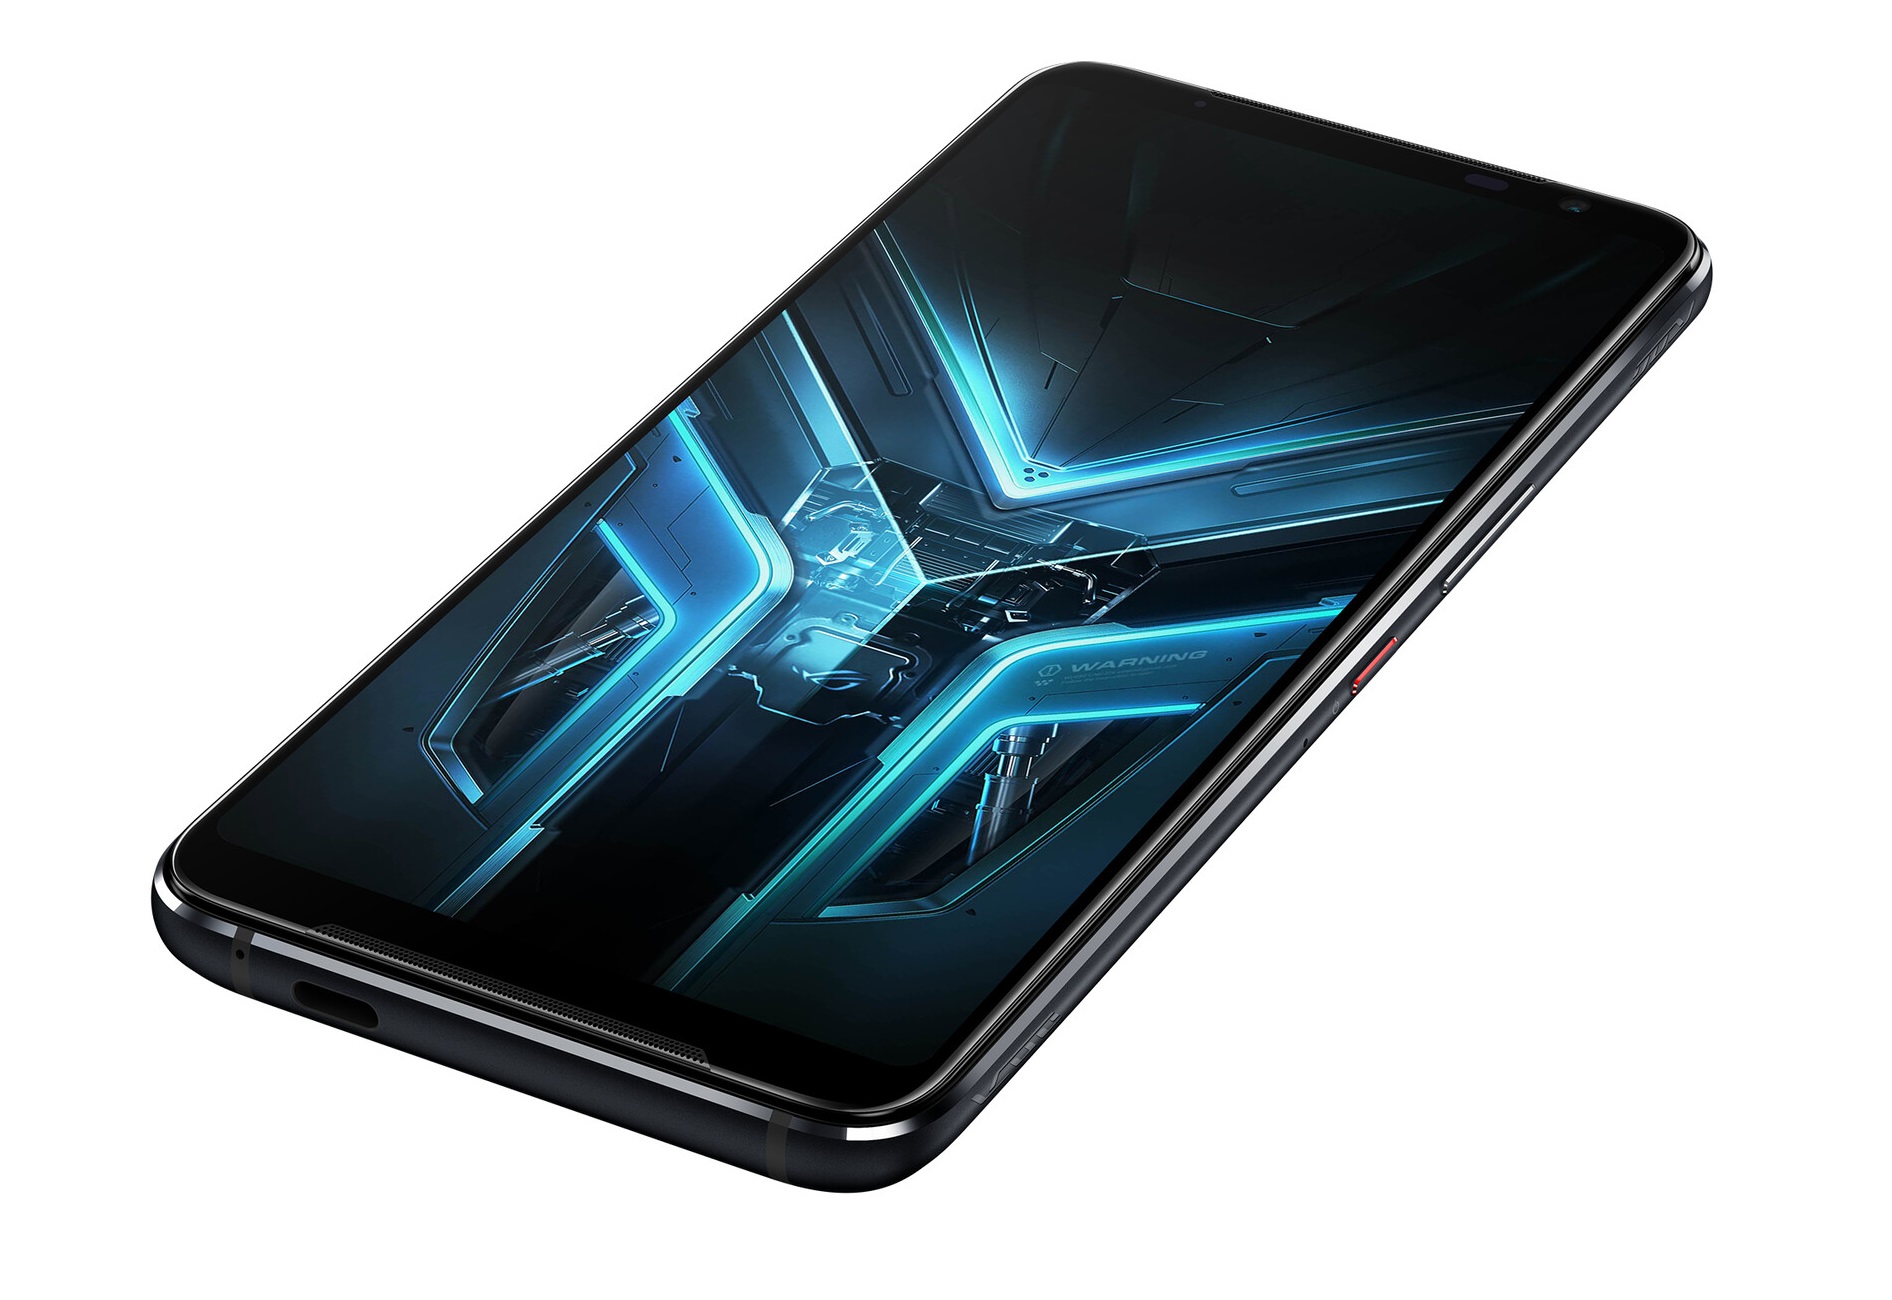 How to Root Asus ROG Phone 3 Strix with Magisk without TWRP